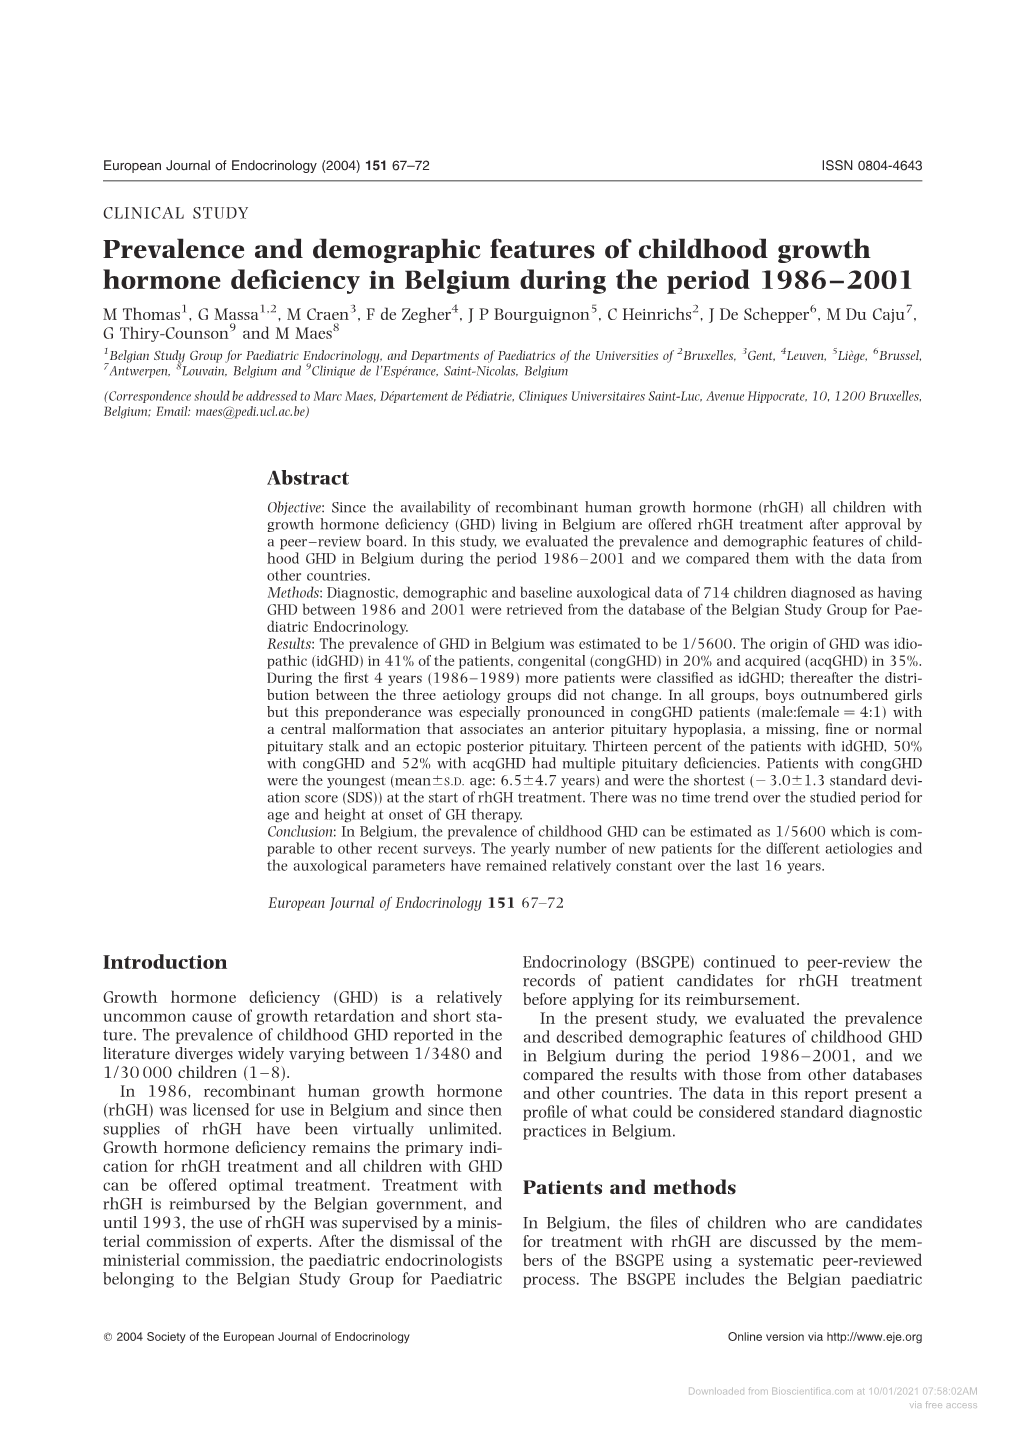 Prevalence and Demographic Features of Childhood Growth Hormone